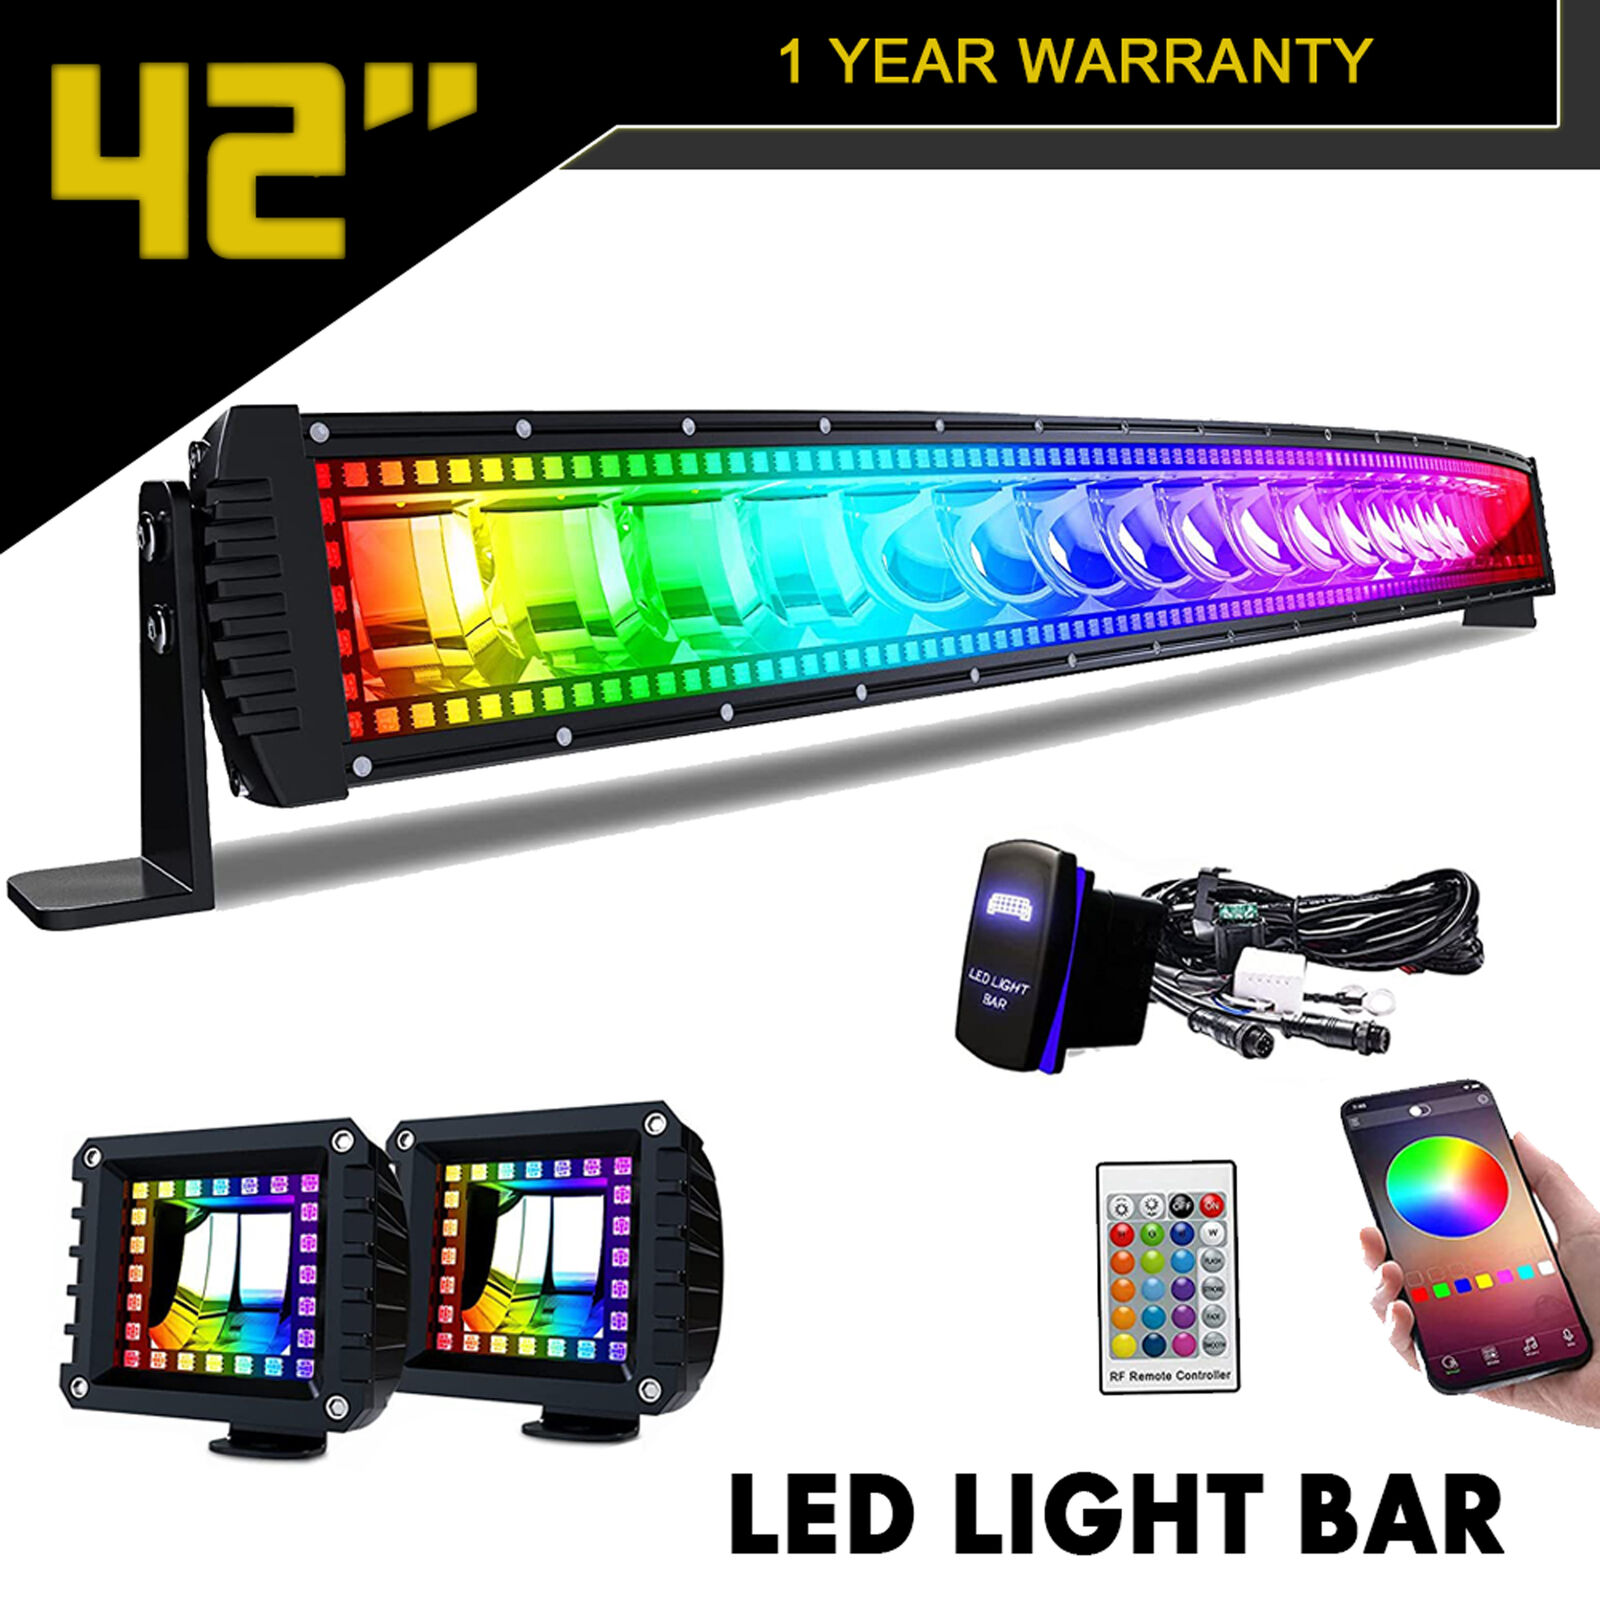 42in 240W Flood Spot RGB Curved Led Work Light Bar Offroad Driving Lamp for Boat